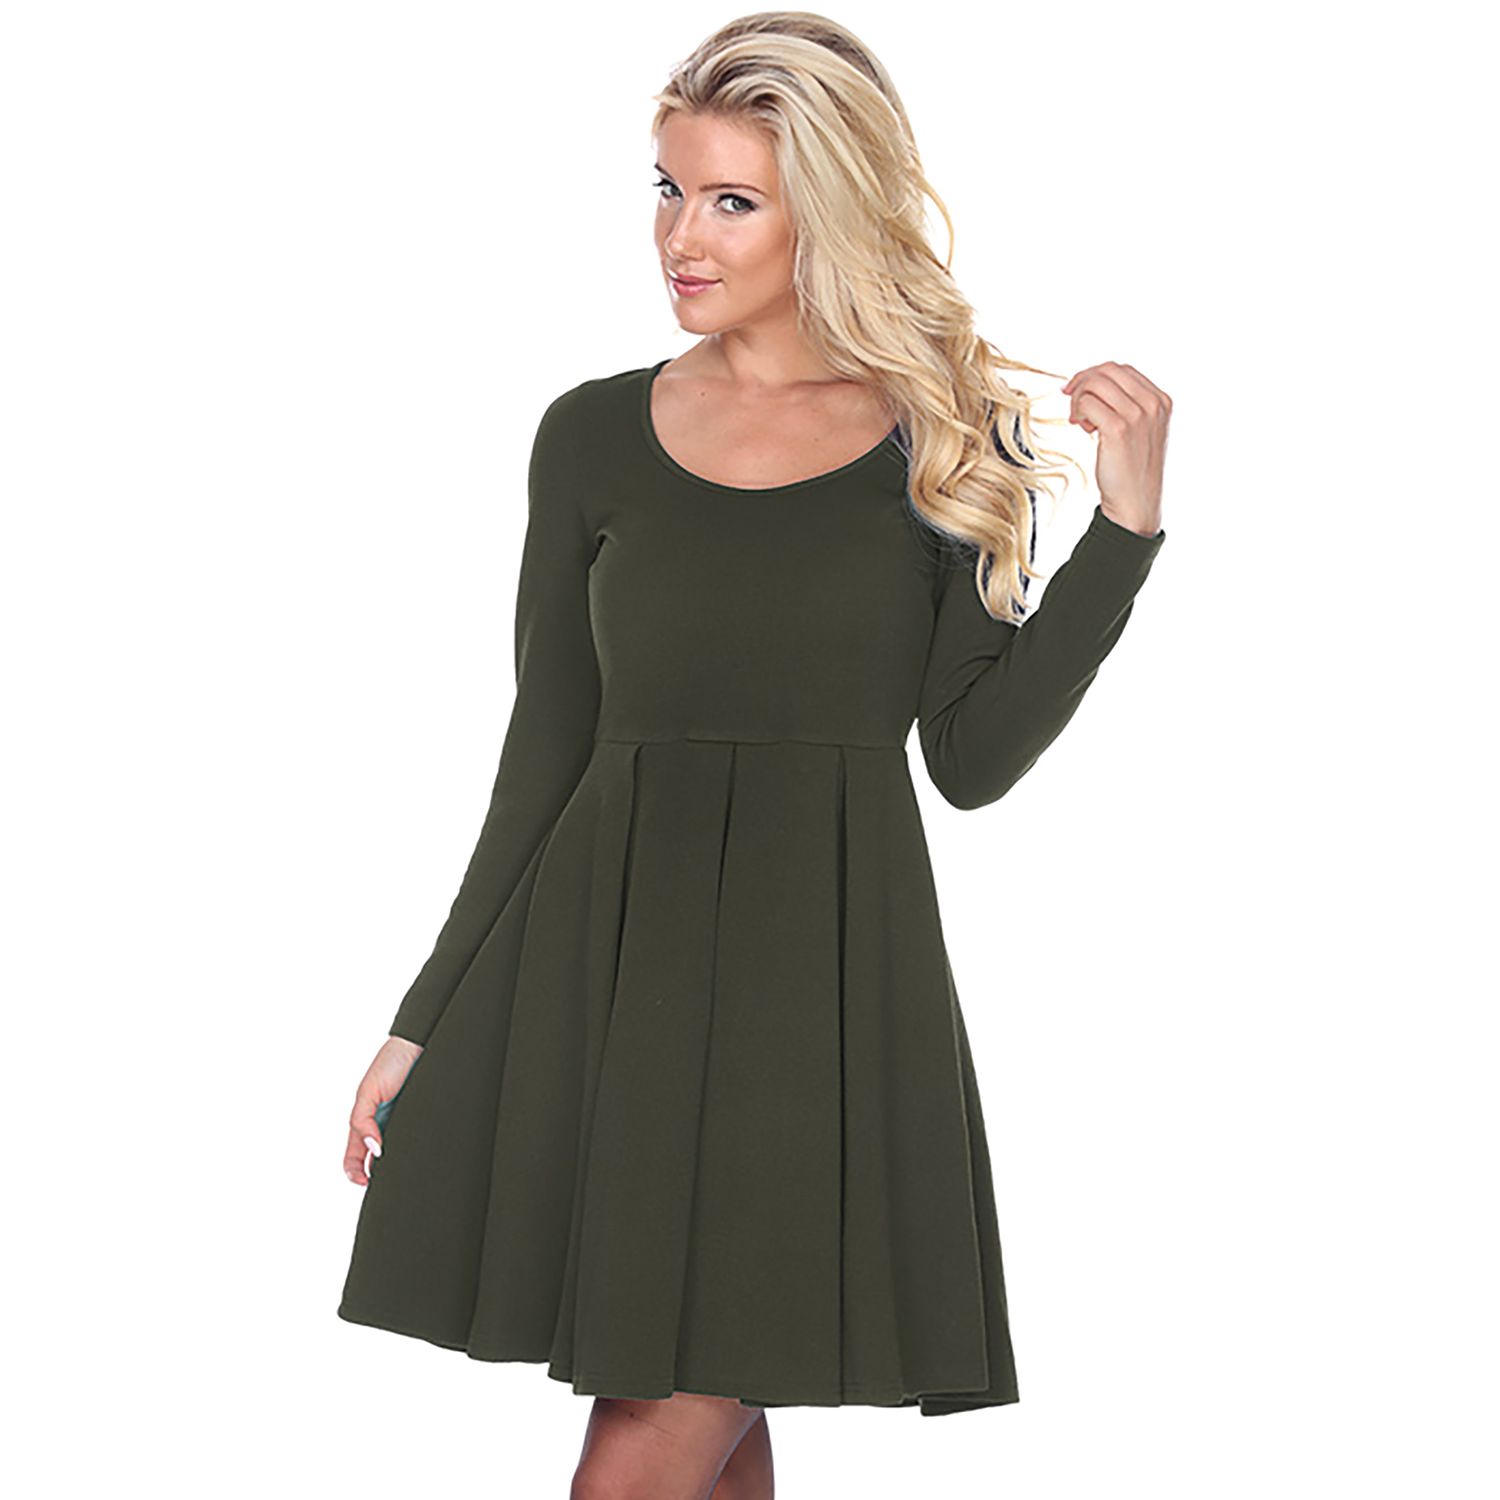 kohl's fit and flare dress